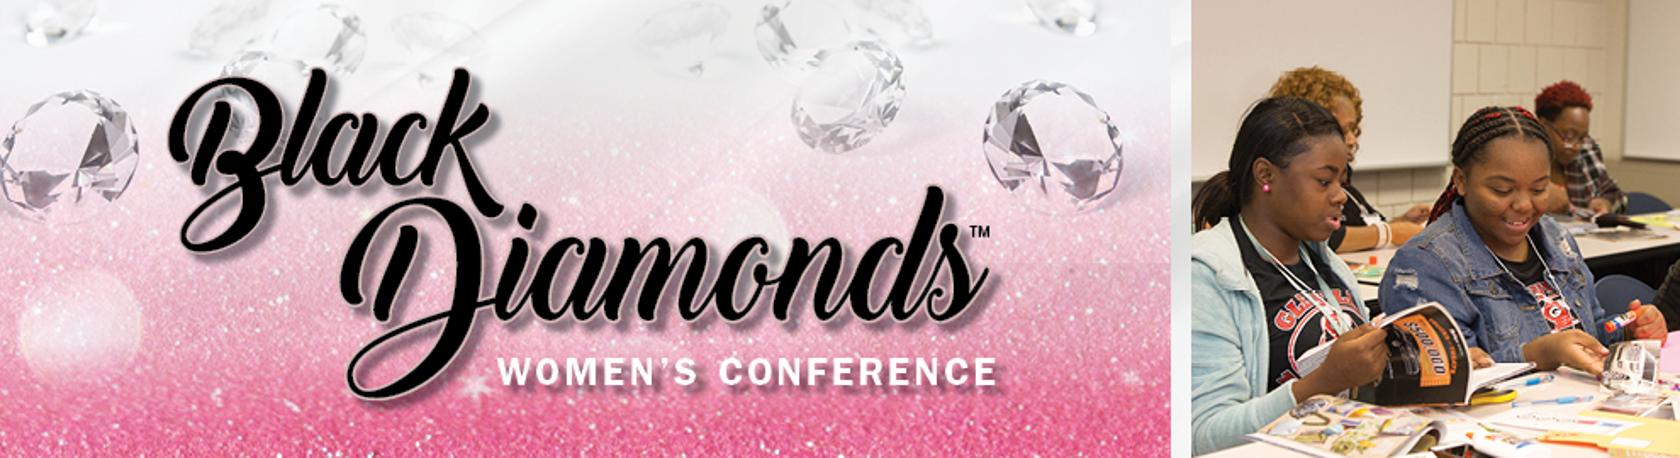 Black Diamond Women's Conference, Save the Date Oct. 15-16